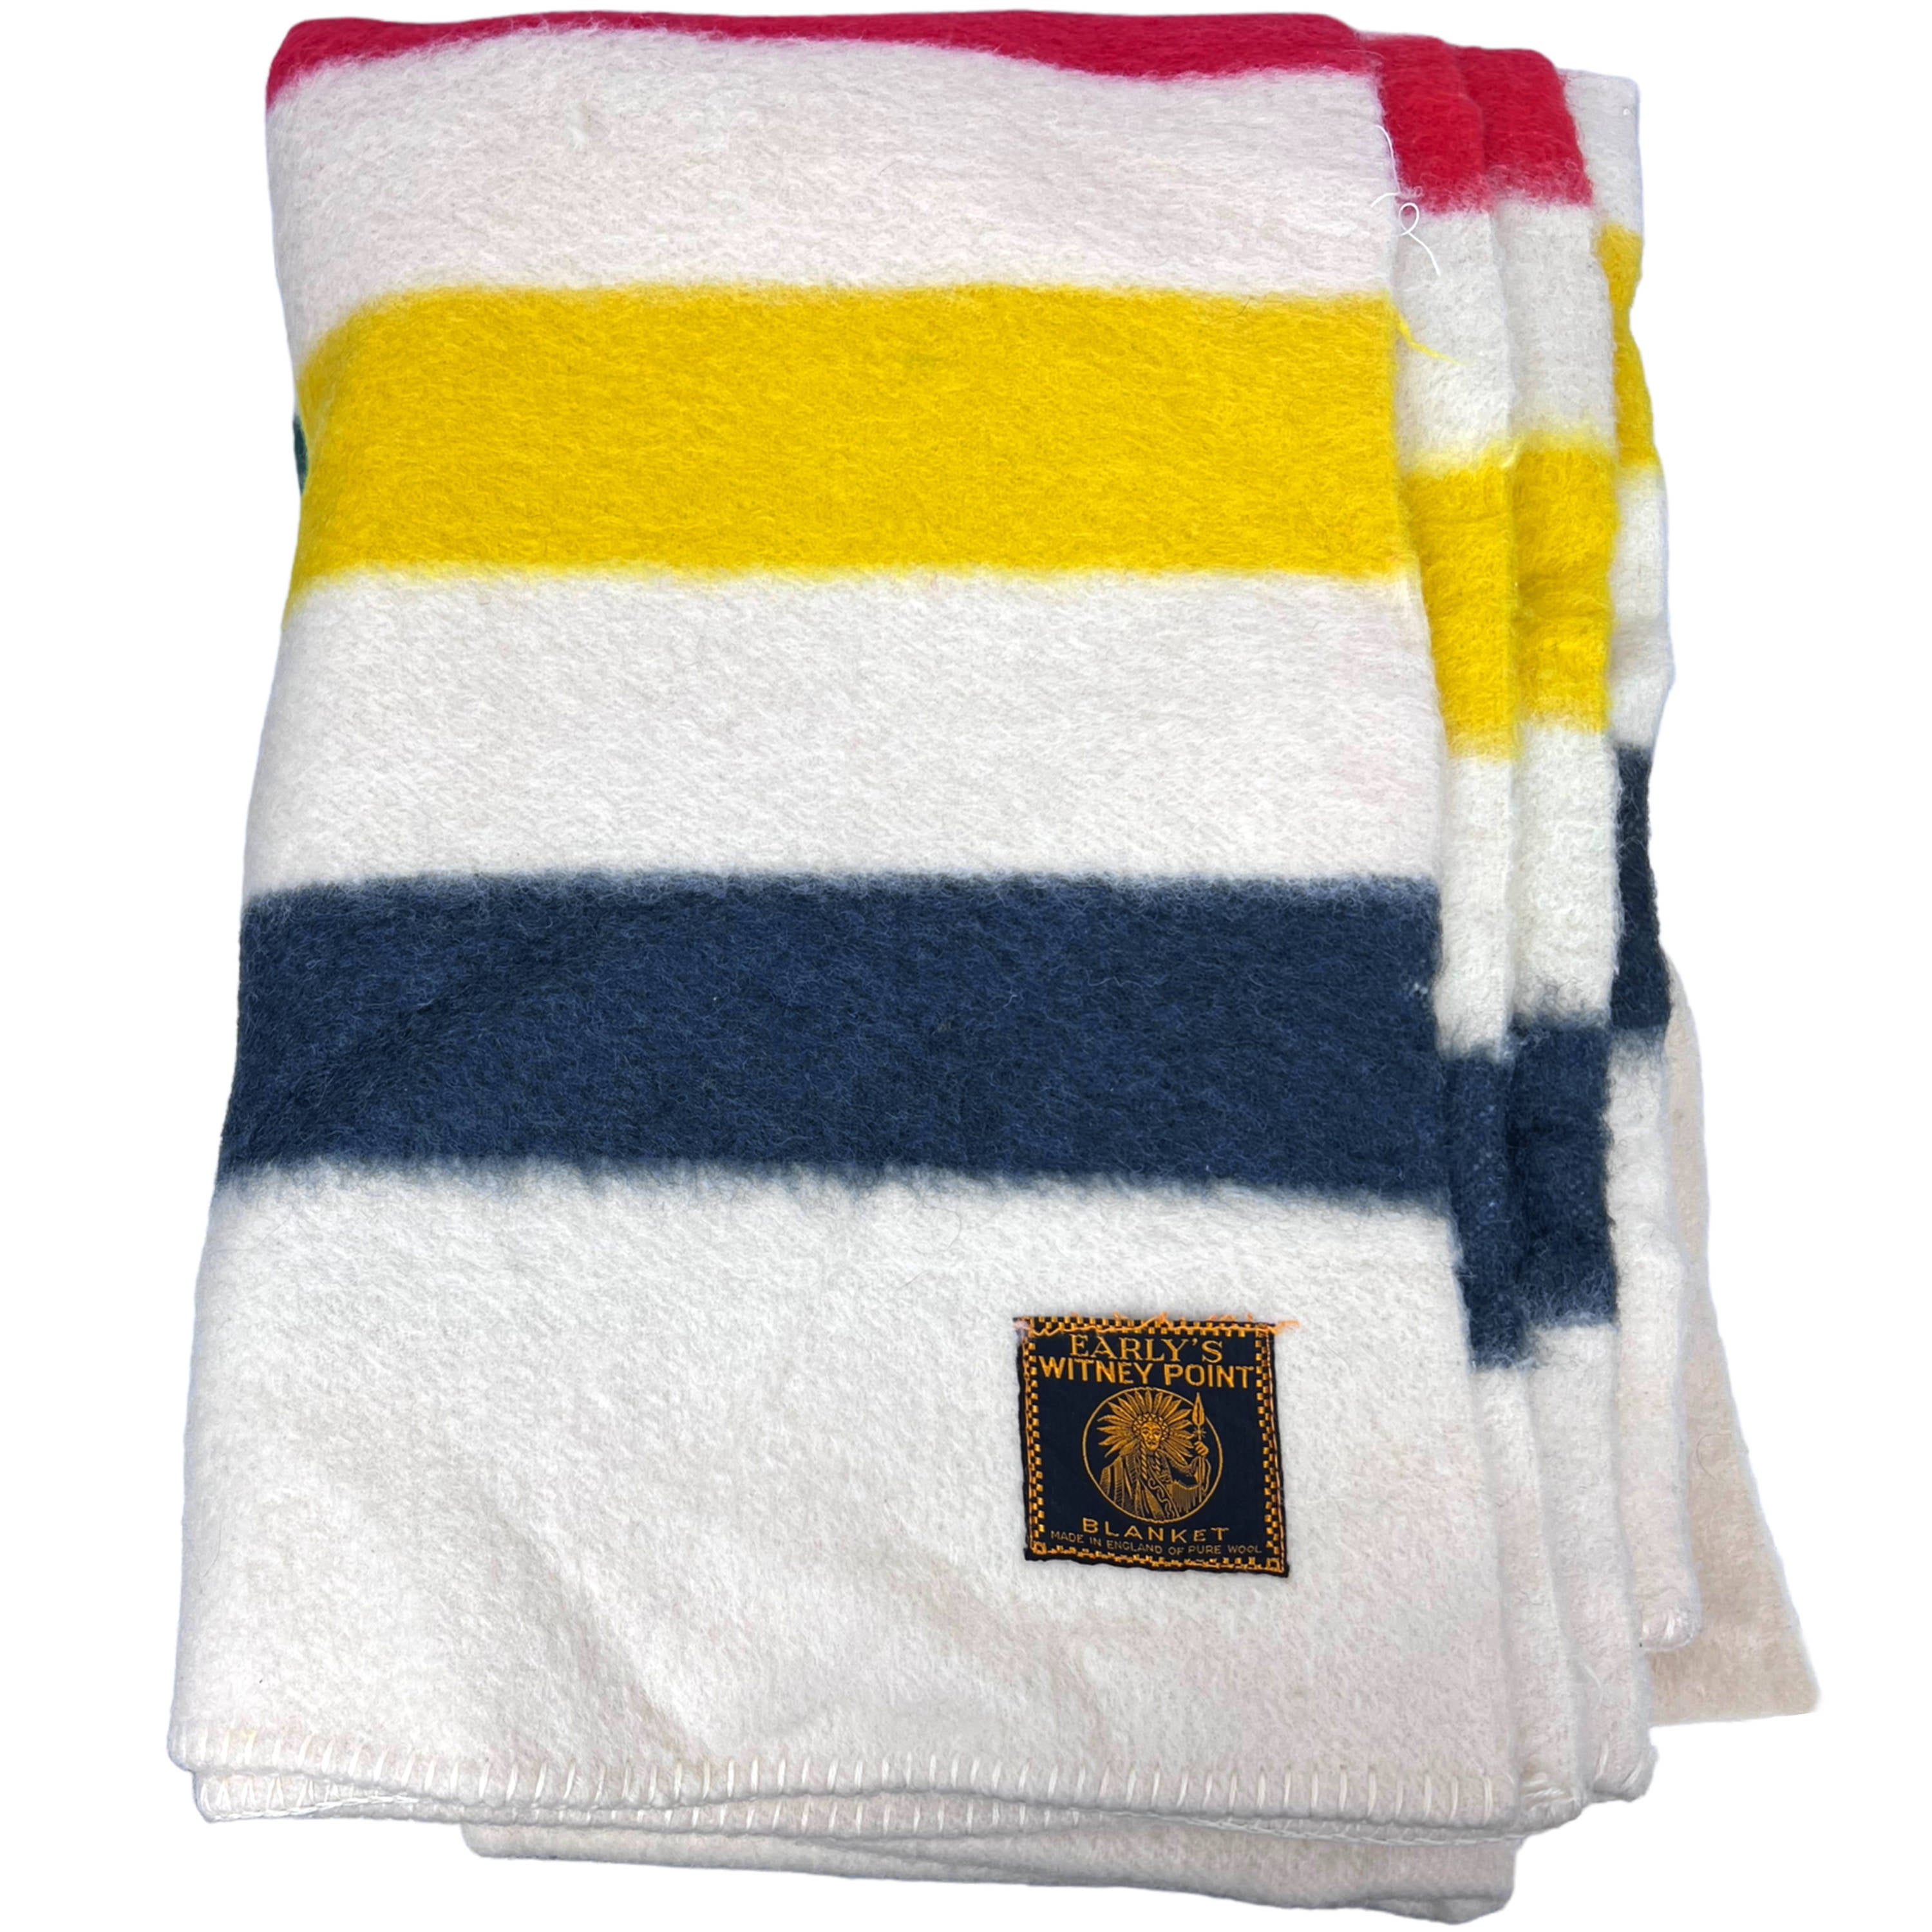 Vintage Early`s Witney Point Blanket - 布団